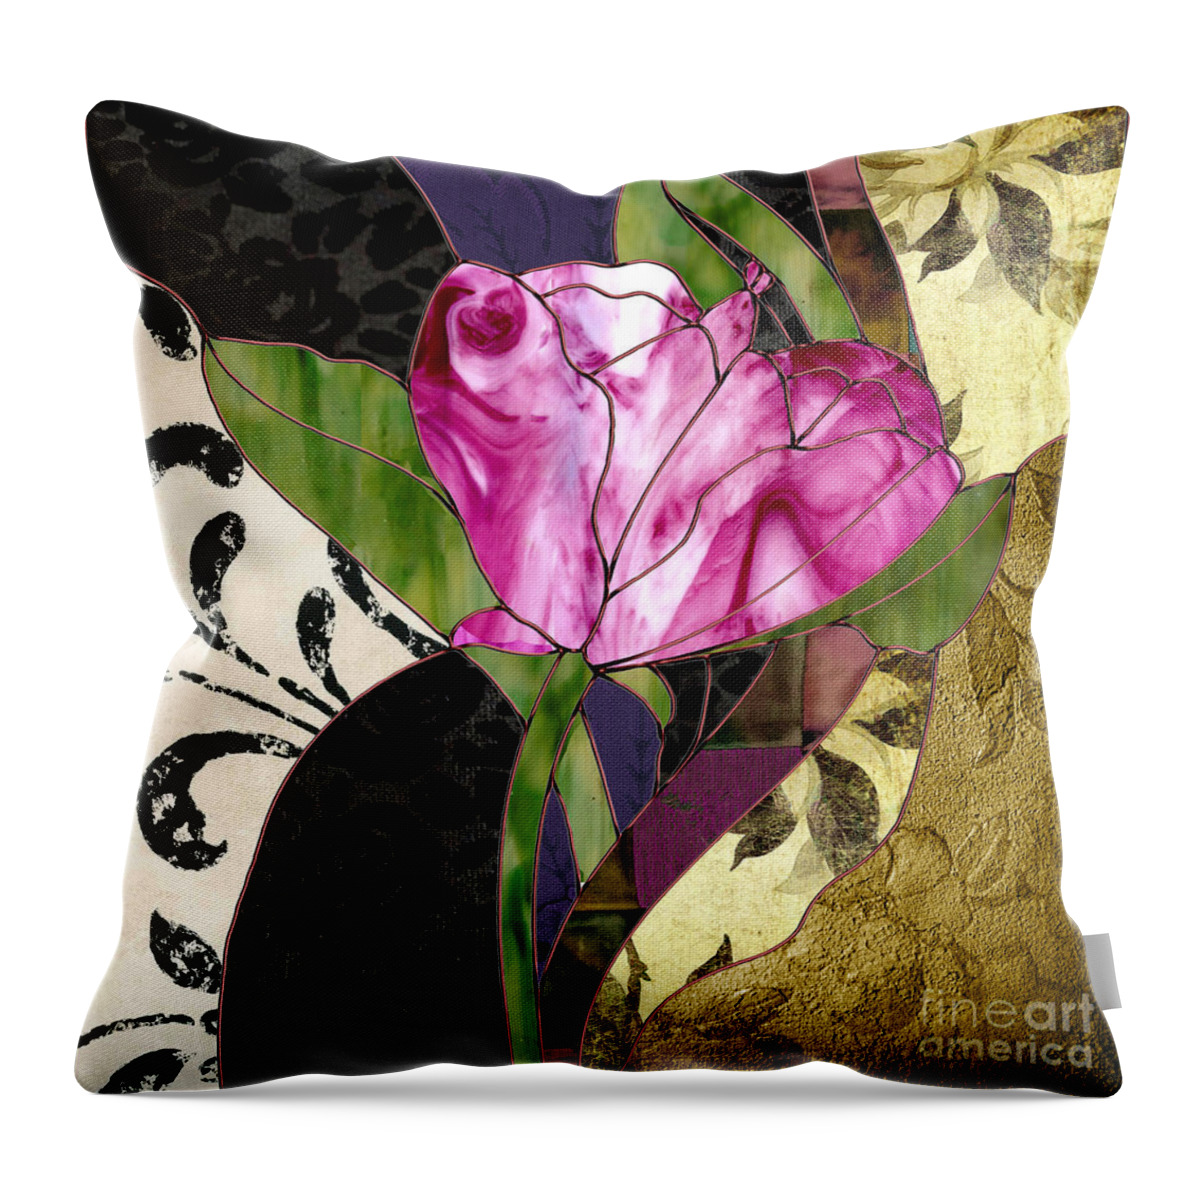 Stained Glass Throw Pillow featuring the painting Glassberry Pink Poppy Stained Glass by Mindy Sommers